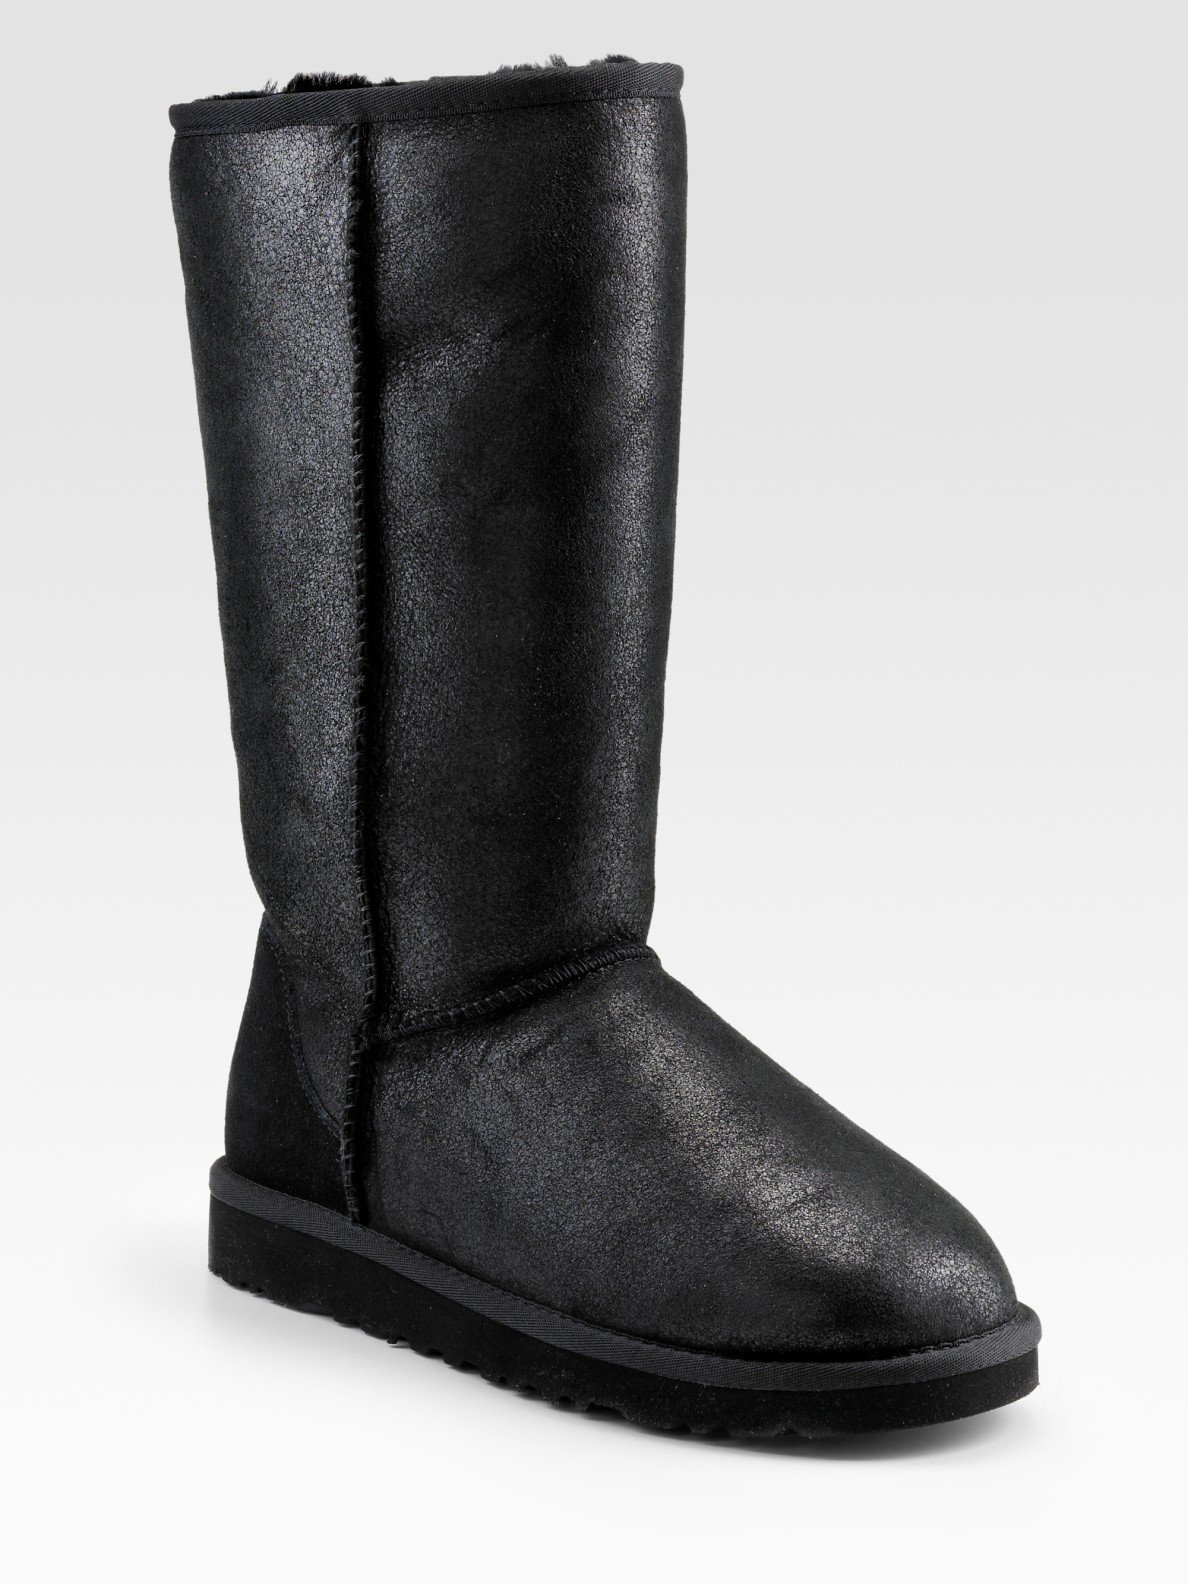 tall leather ugg boots